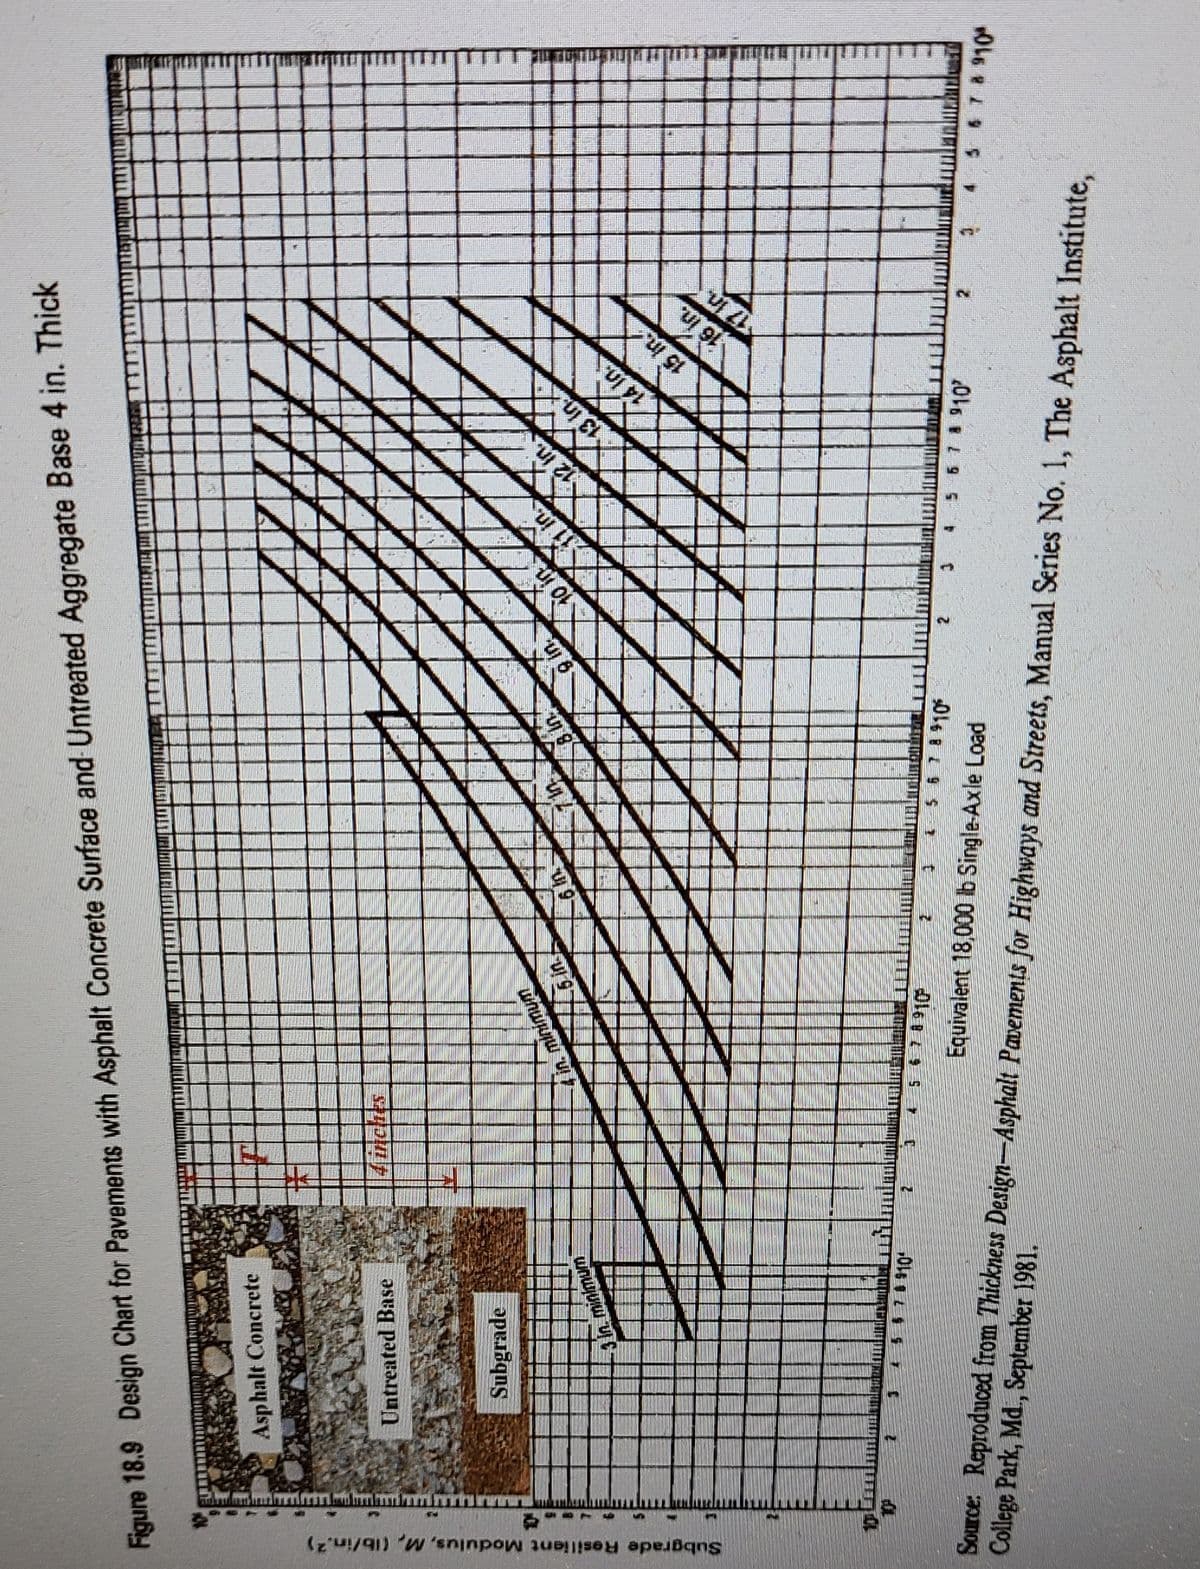 Figure 18.9 Design Chart for Pavements with Asphalt Concrete Surface and Untreated Aggregate Base 4 in. Thick
Subgrade Resilient Modulus, M, (lb/in.2)
dominfraraumbririh r
PETO PAPI
Asphalt Concrete
Untreated Base
Subgrade
3 ln. minimum
345678910¹
4 incies
4 in. minimum
5 in
45678910
2
3 In.
5678910
Equivalent 18,000 lb Single-Axle Load
9 in
2
บ 01
1
11 in.
12 In.
13 In
6
14 In.
910'
내외
16 in.
VIZL
2
15
College Park, Md., September 1981.
Source: Reproduced from Thickness Design-Asphalt Pavements for Highways and Streets, Manual Series No. 1, The Asphalt Institute,
5 6 7 8 910